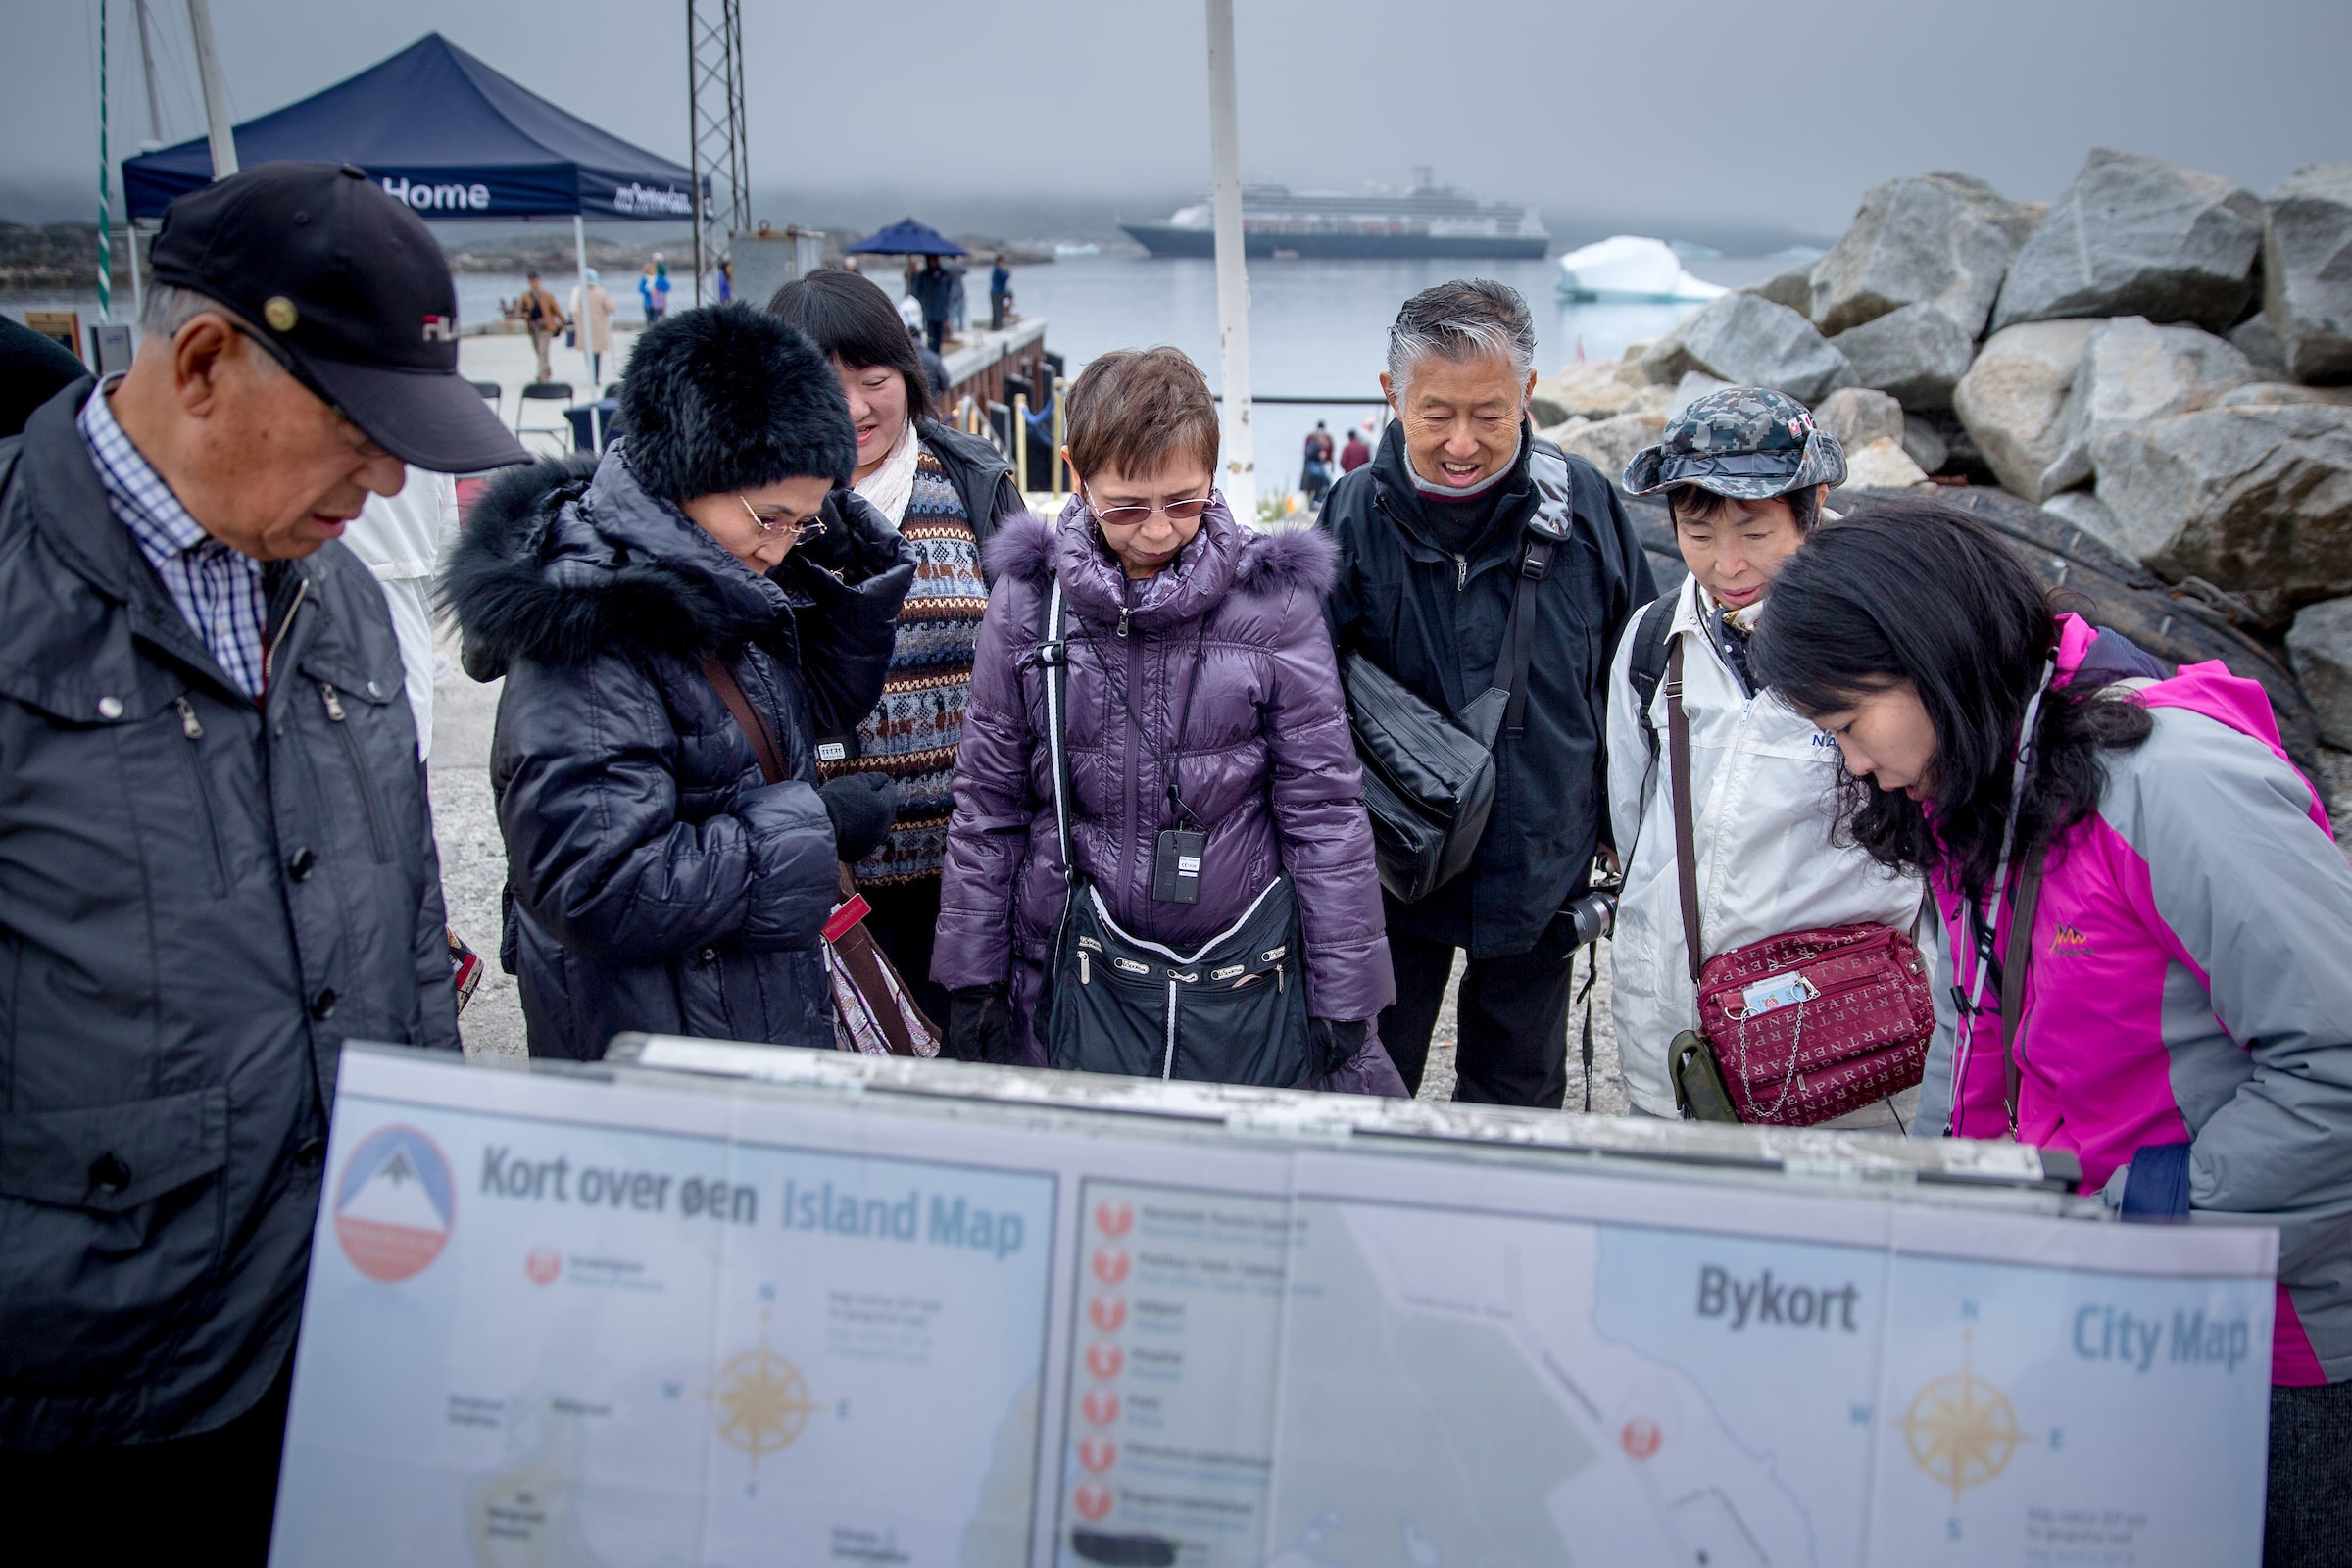 Cruise guests in Nanortalik in South Greenland studying a map of town. Photo by Photo by Mads Pihl - Visit Greenland